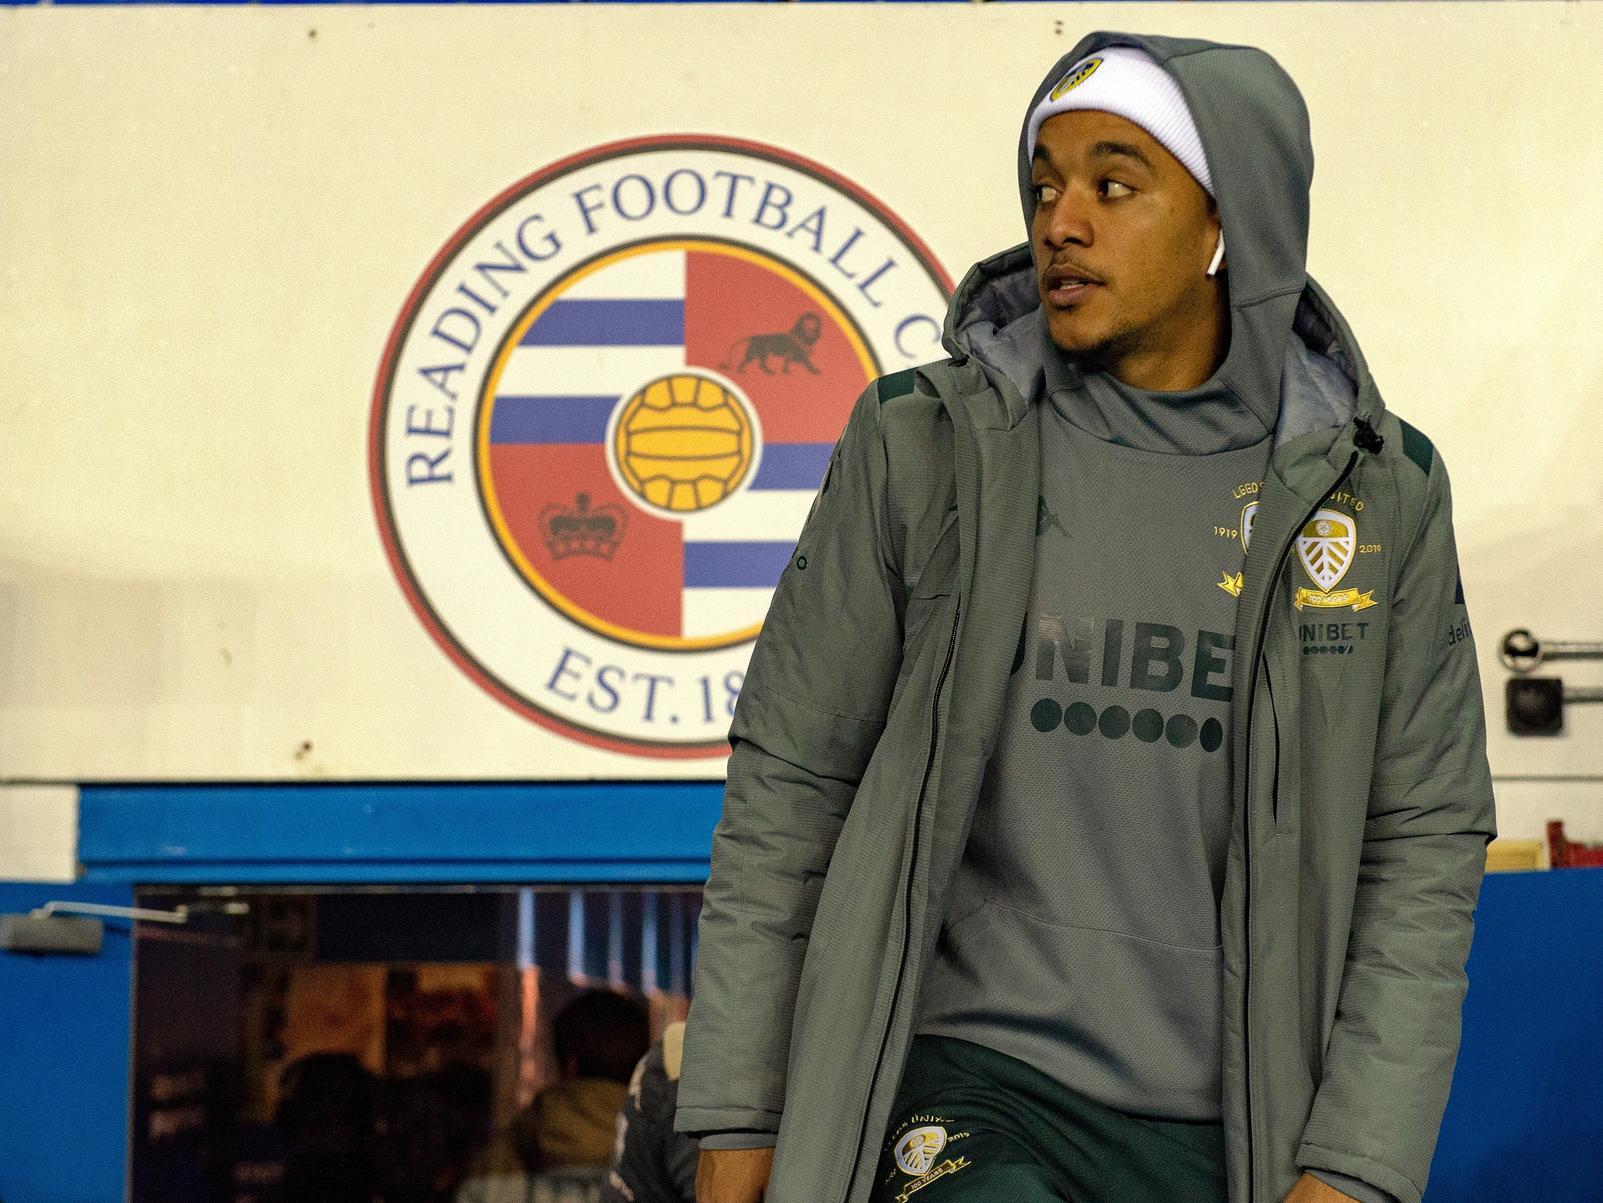 Leeds United winger Helder Costa has dropped out of the starting 11 following the return of Pablo Hernandez.